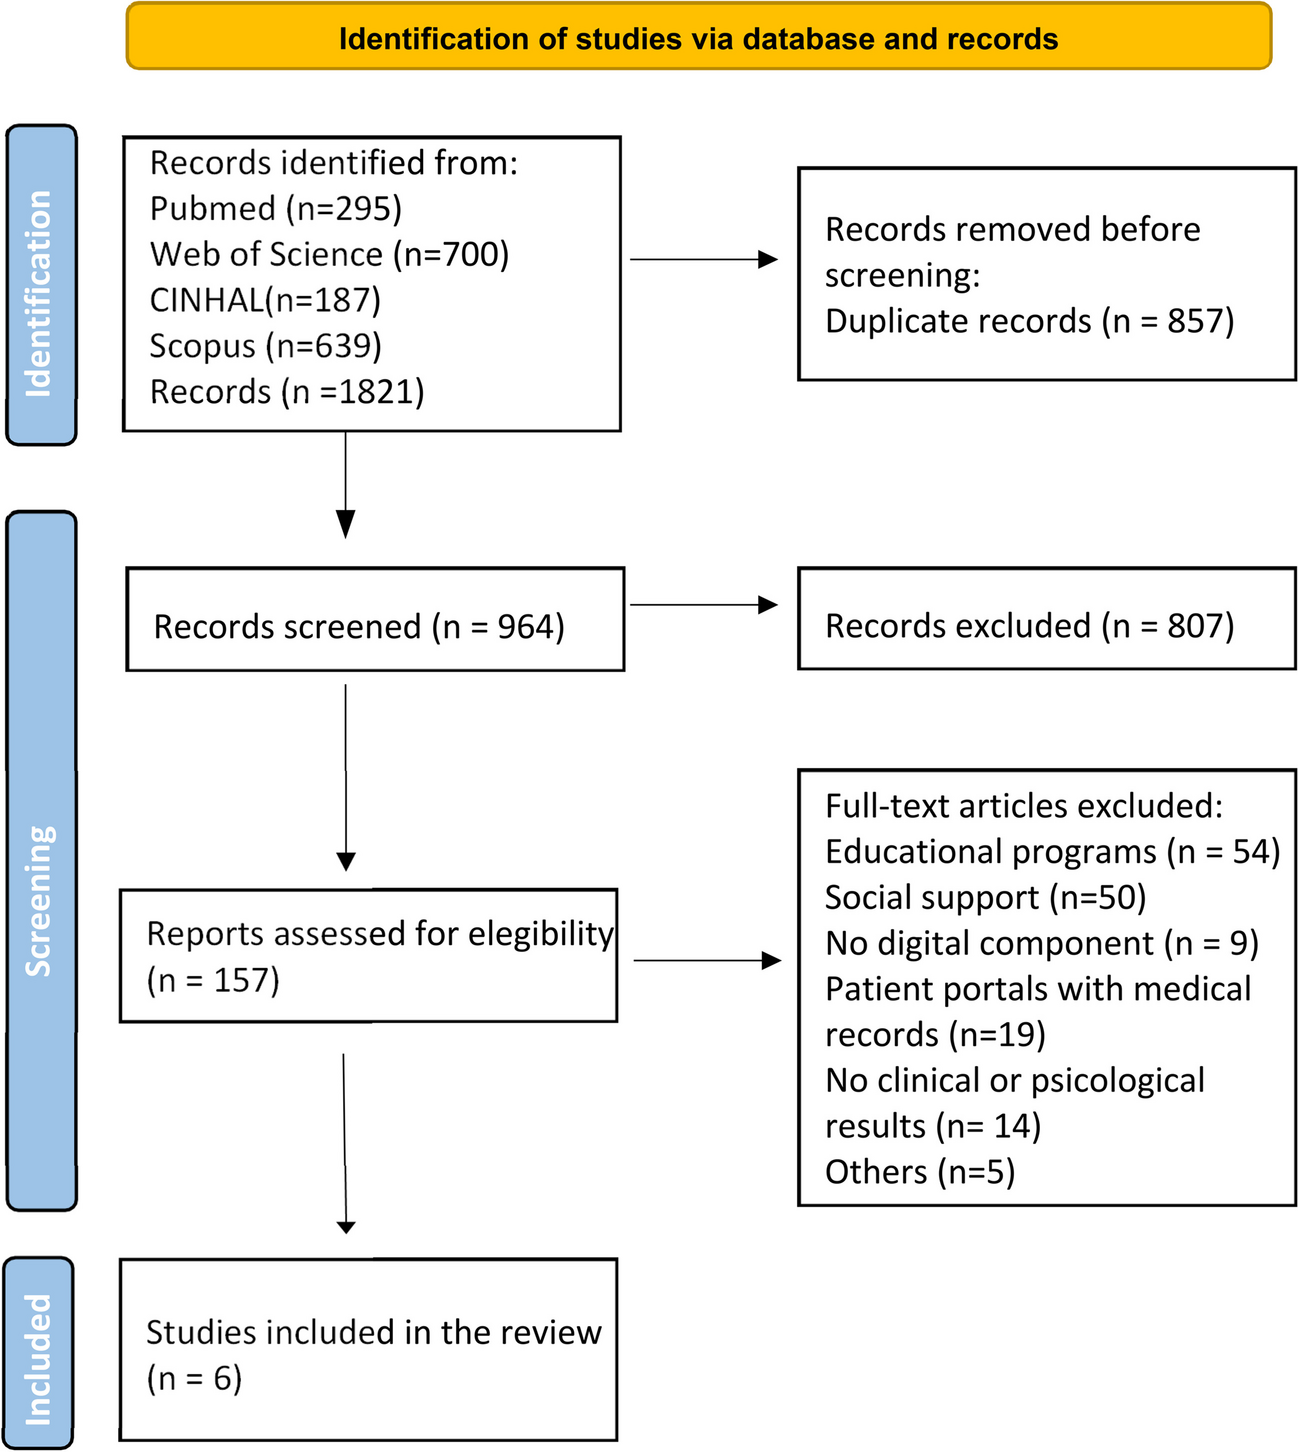 Use of Online Communities among People with Type 2 Diabetes: A Scoping Review